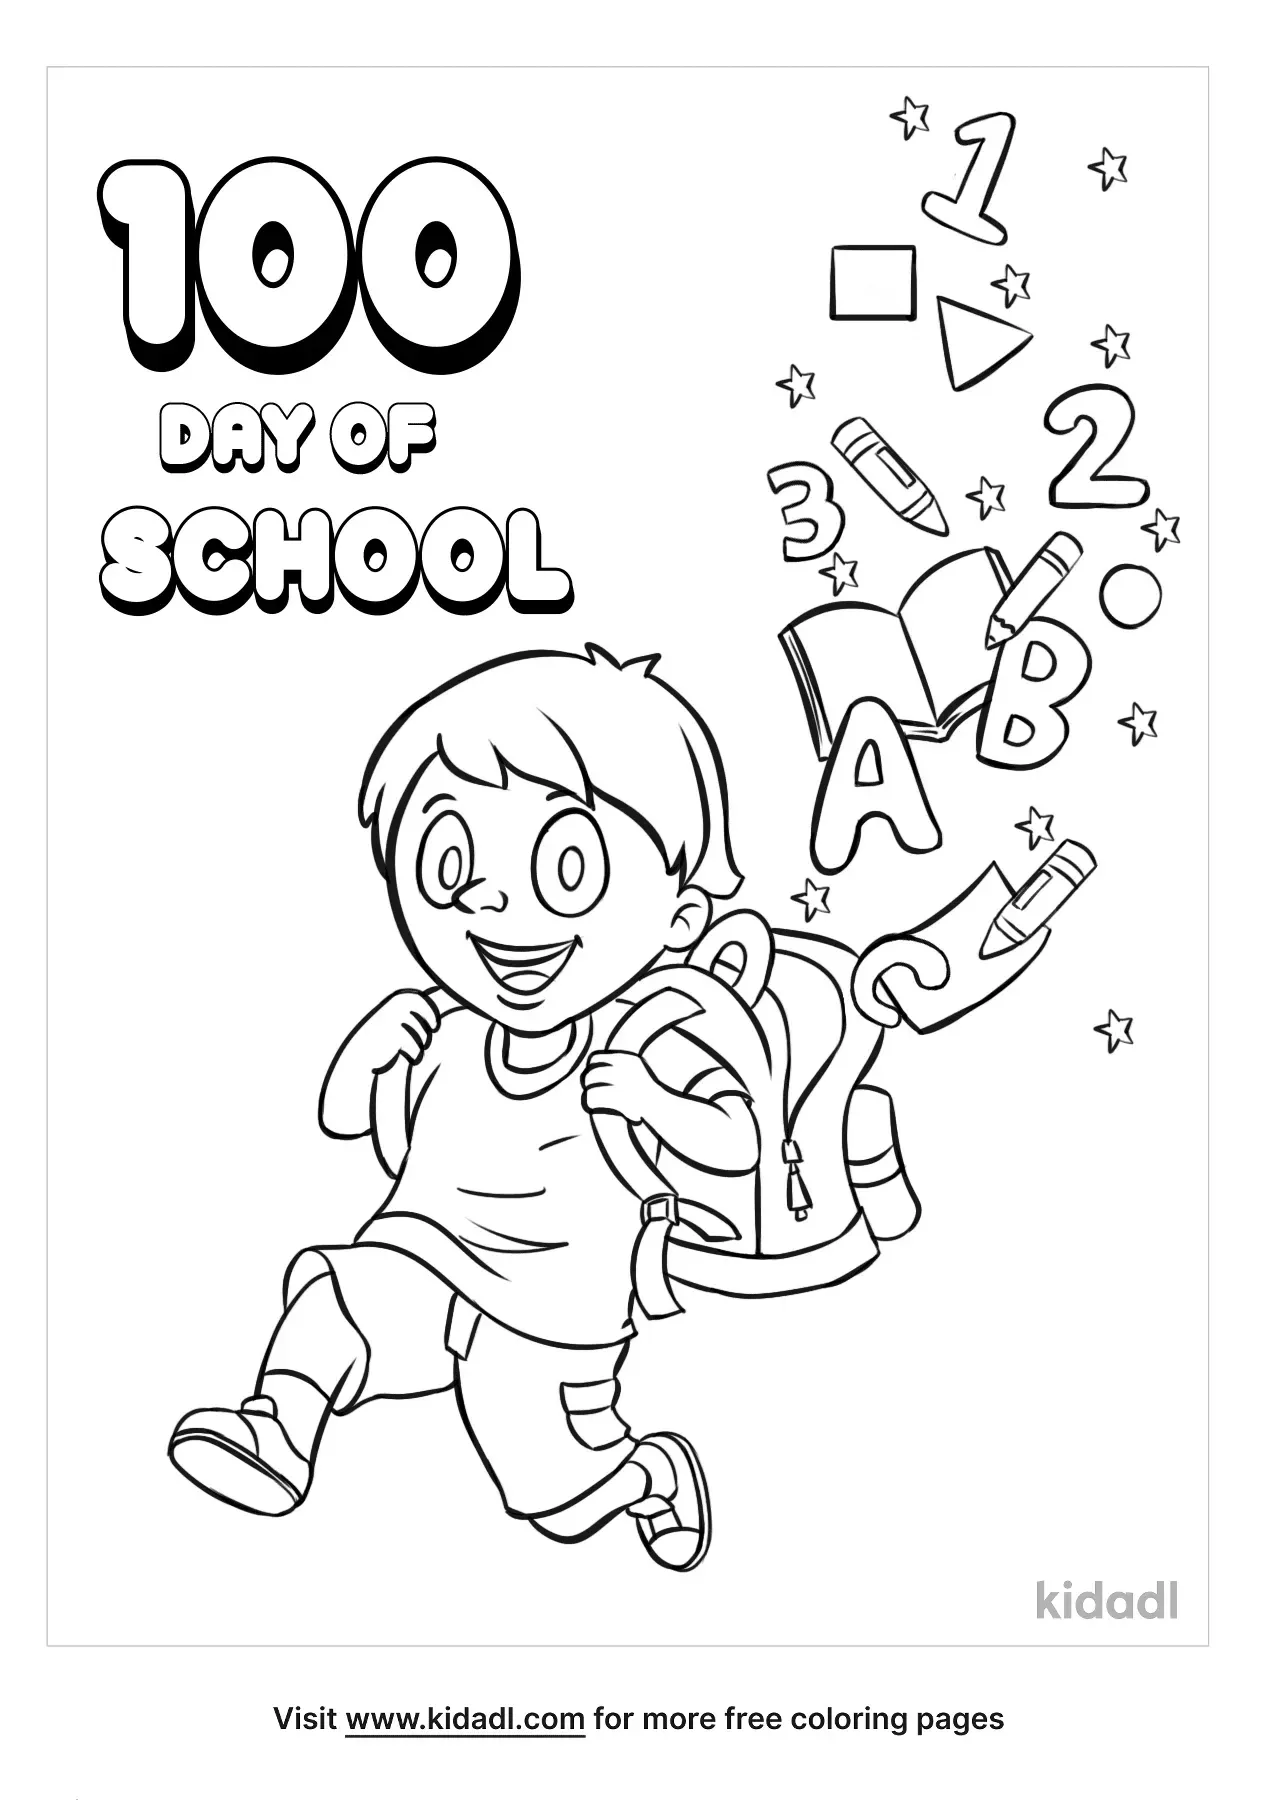 100 Day's of School Worksheets Free Coloring Pages 25